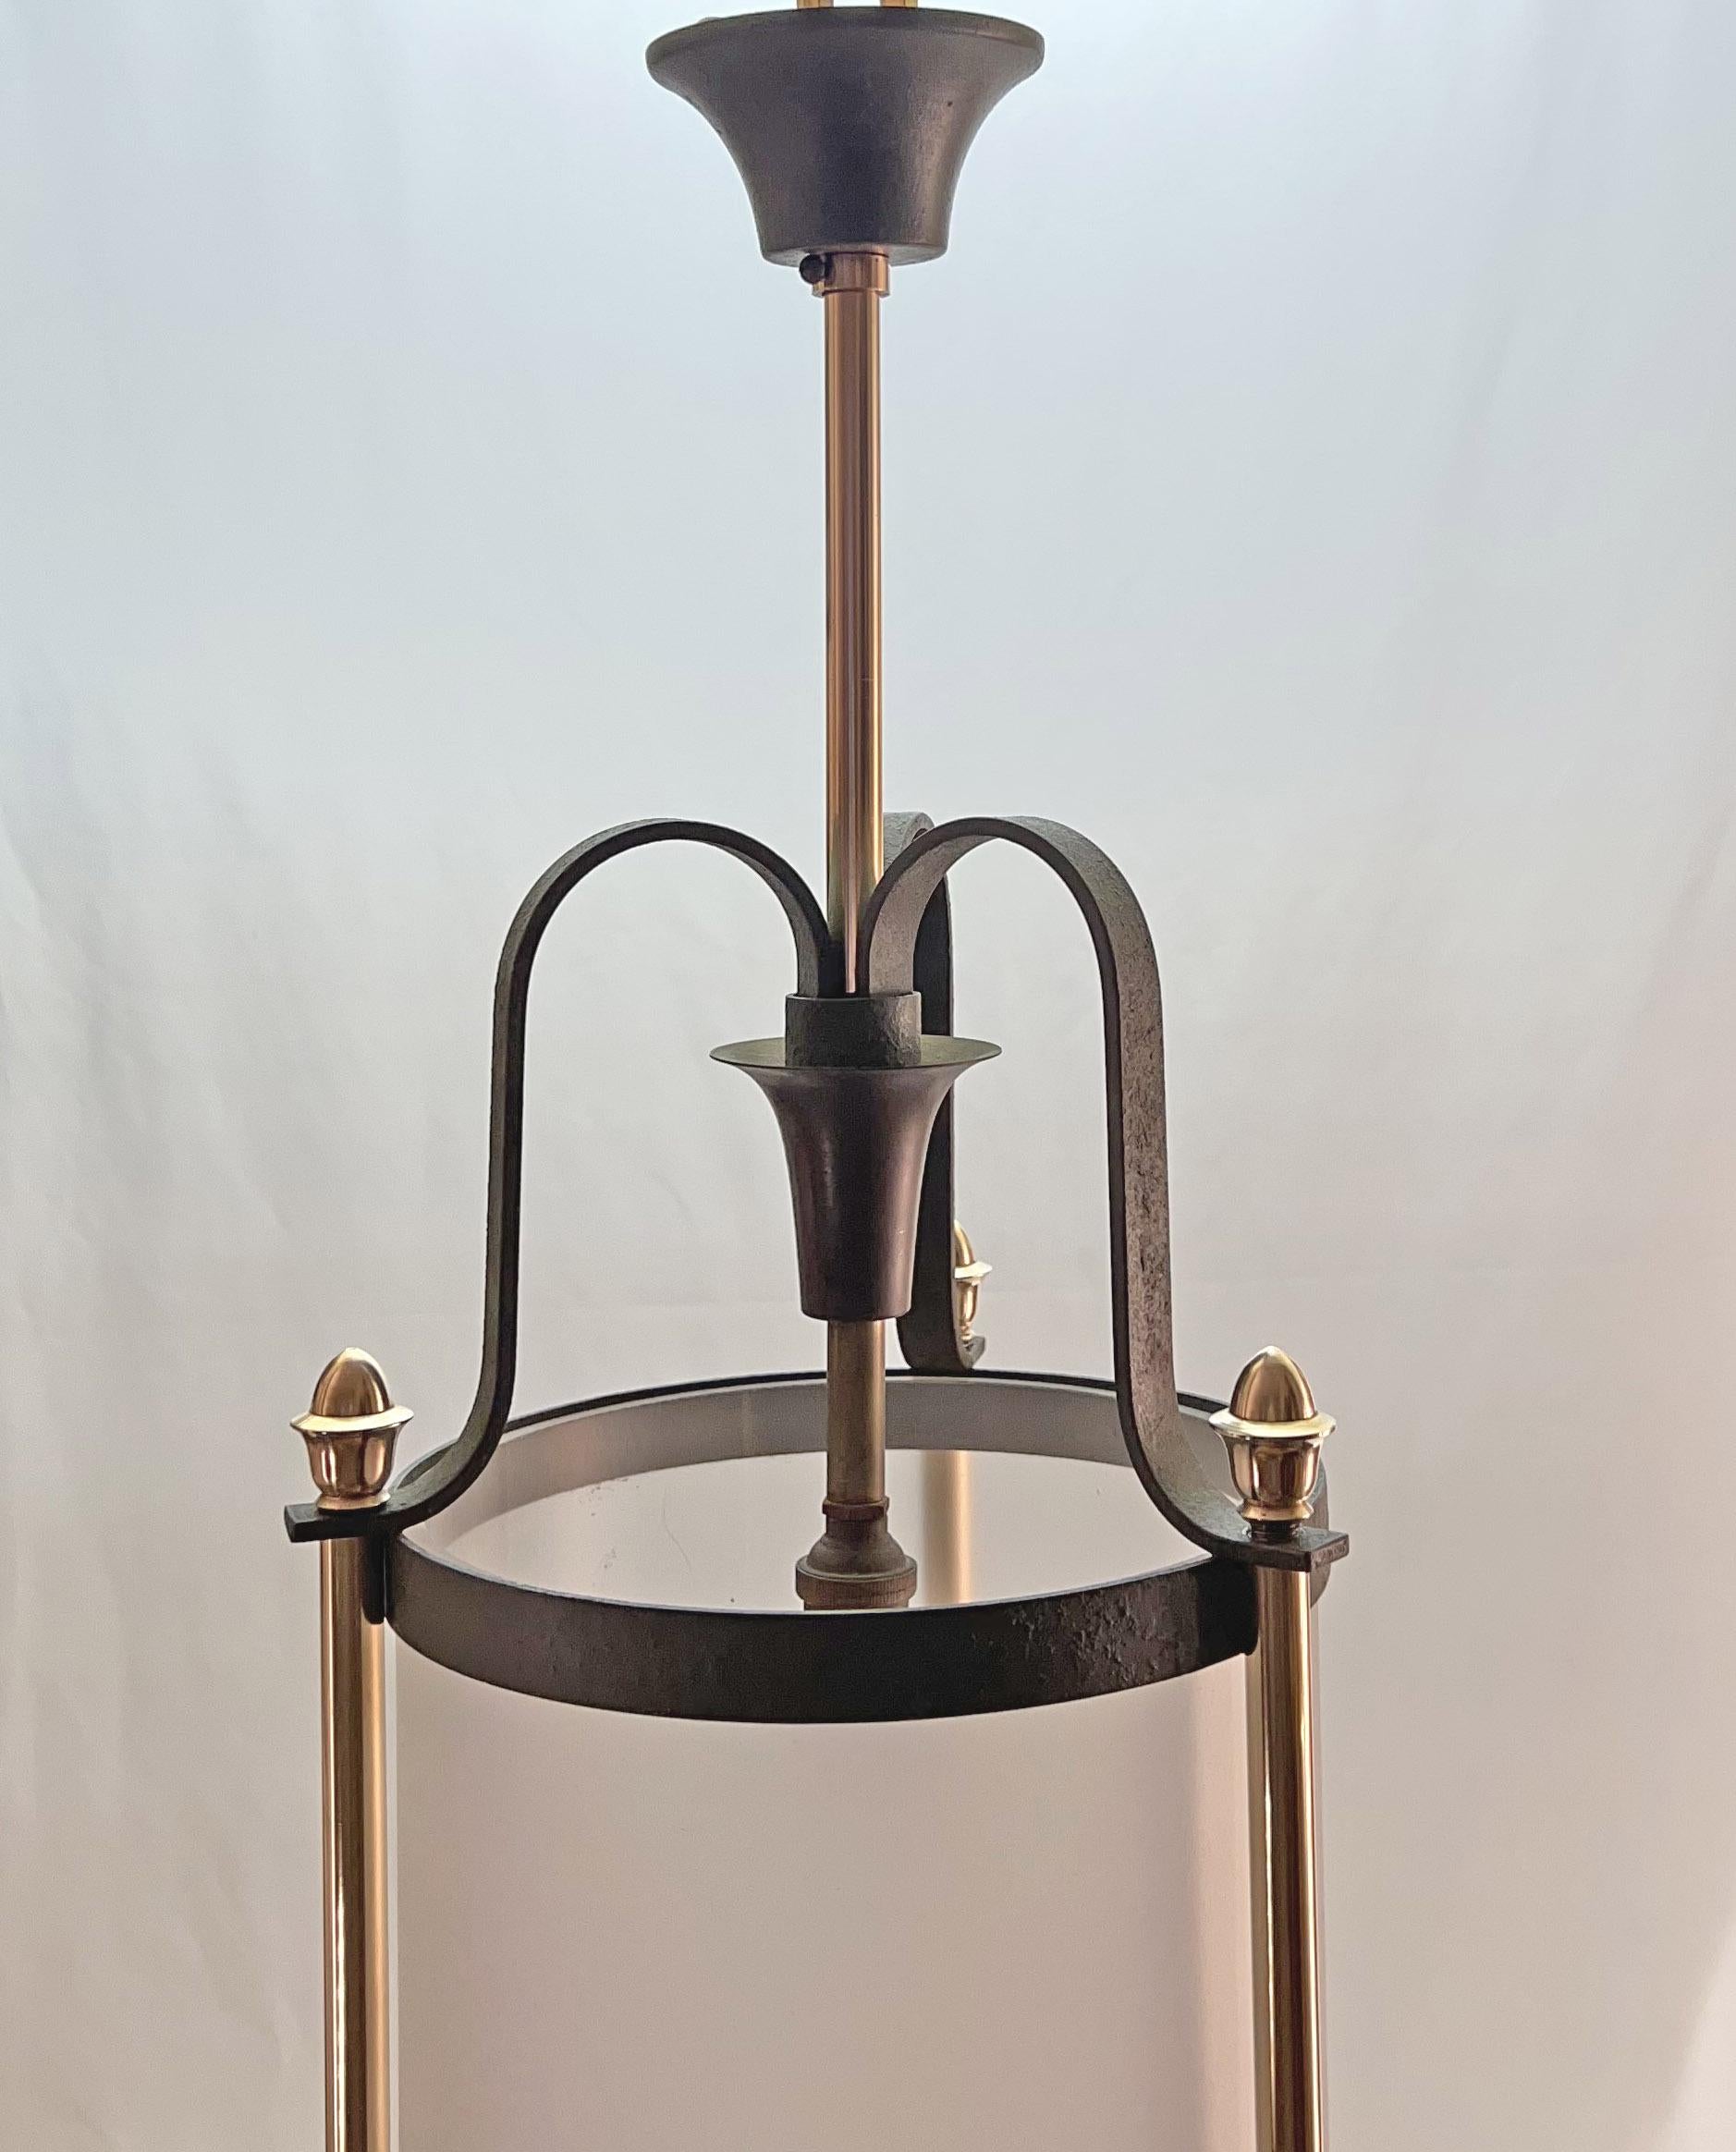 Lantern Hanging Light in Wrought Iron and Bronze, 1940s For Sale 5